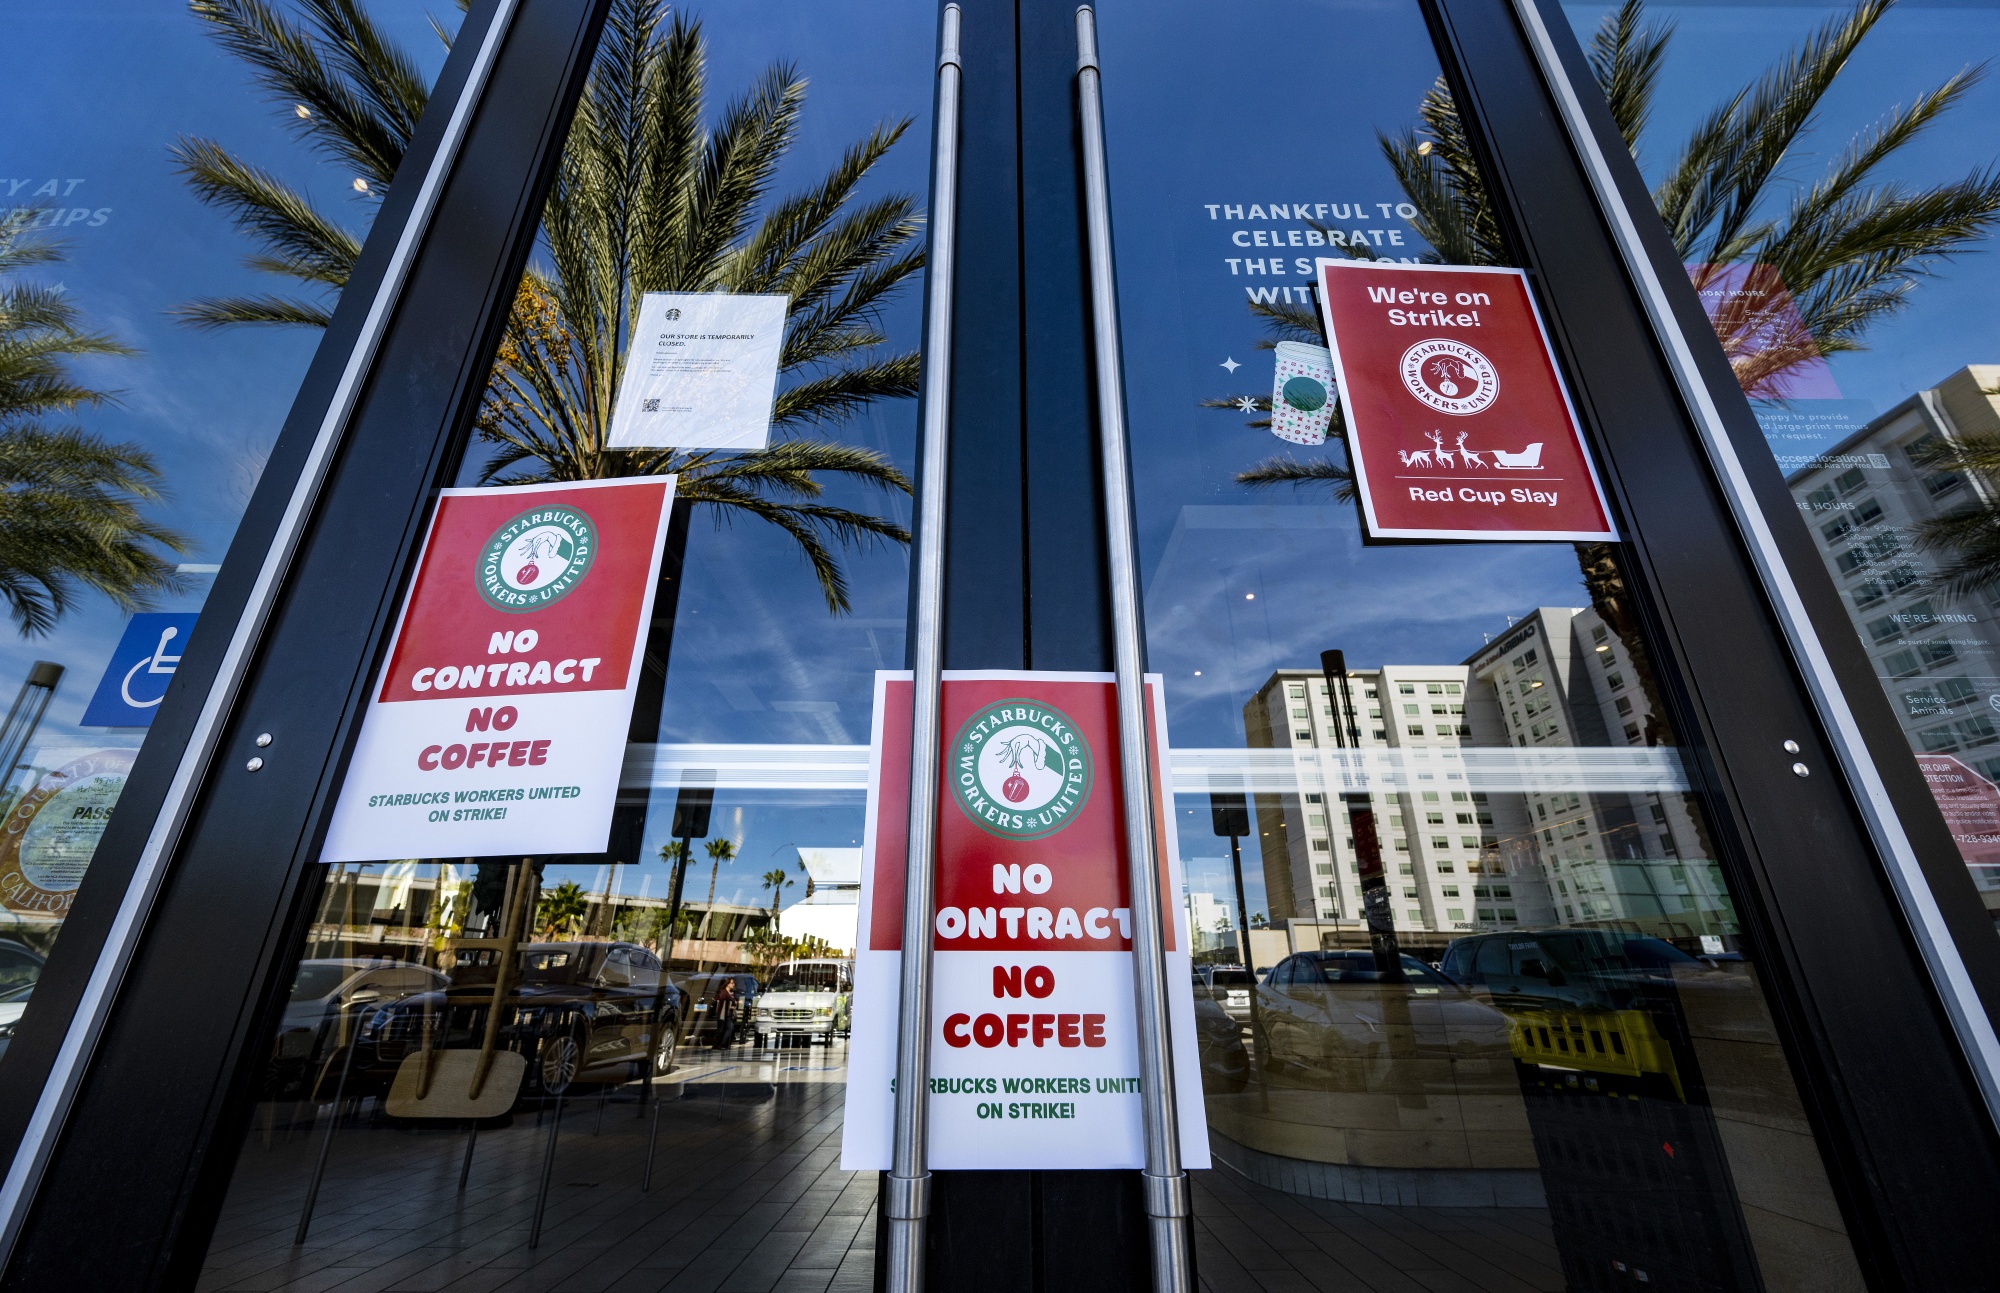 Starbucks' Red Cup Day is Thursday as union plans walkout